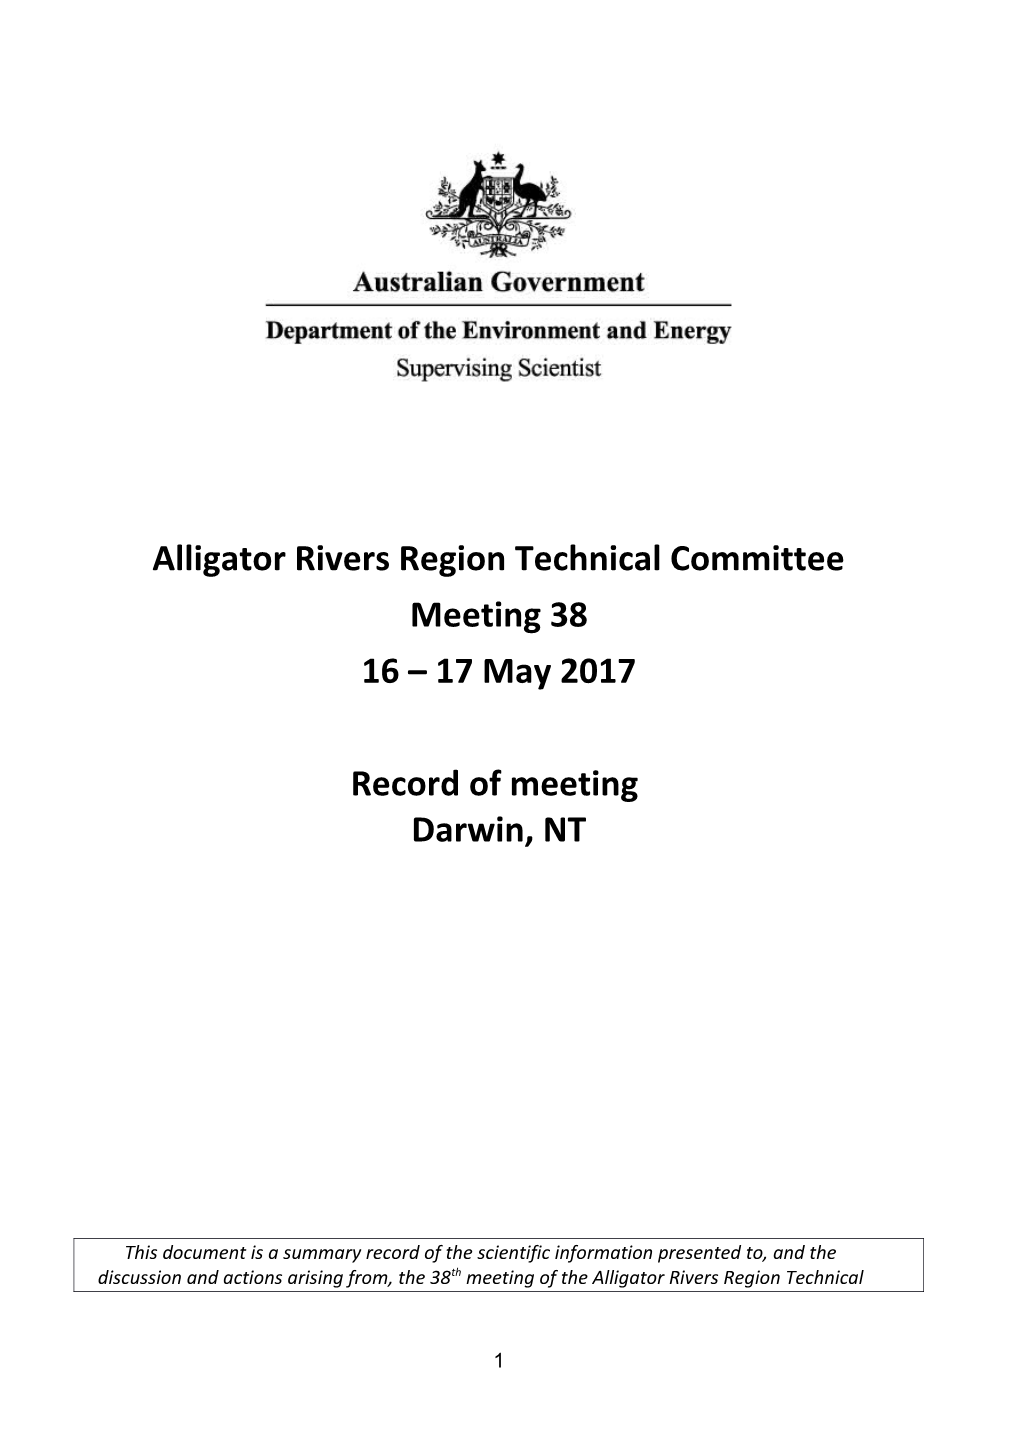 Alligator Rivers Region Technical Committee